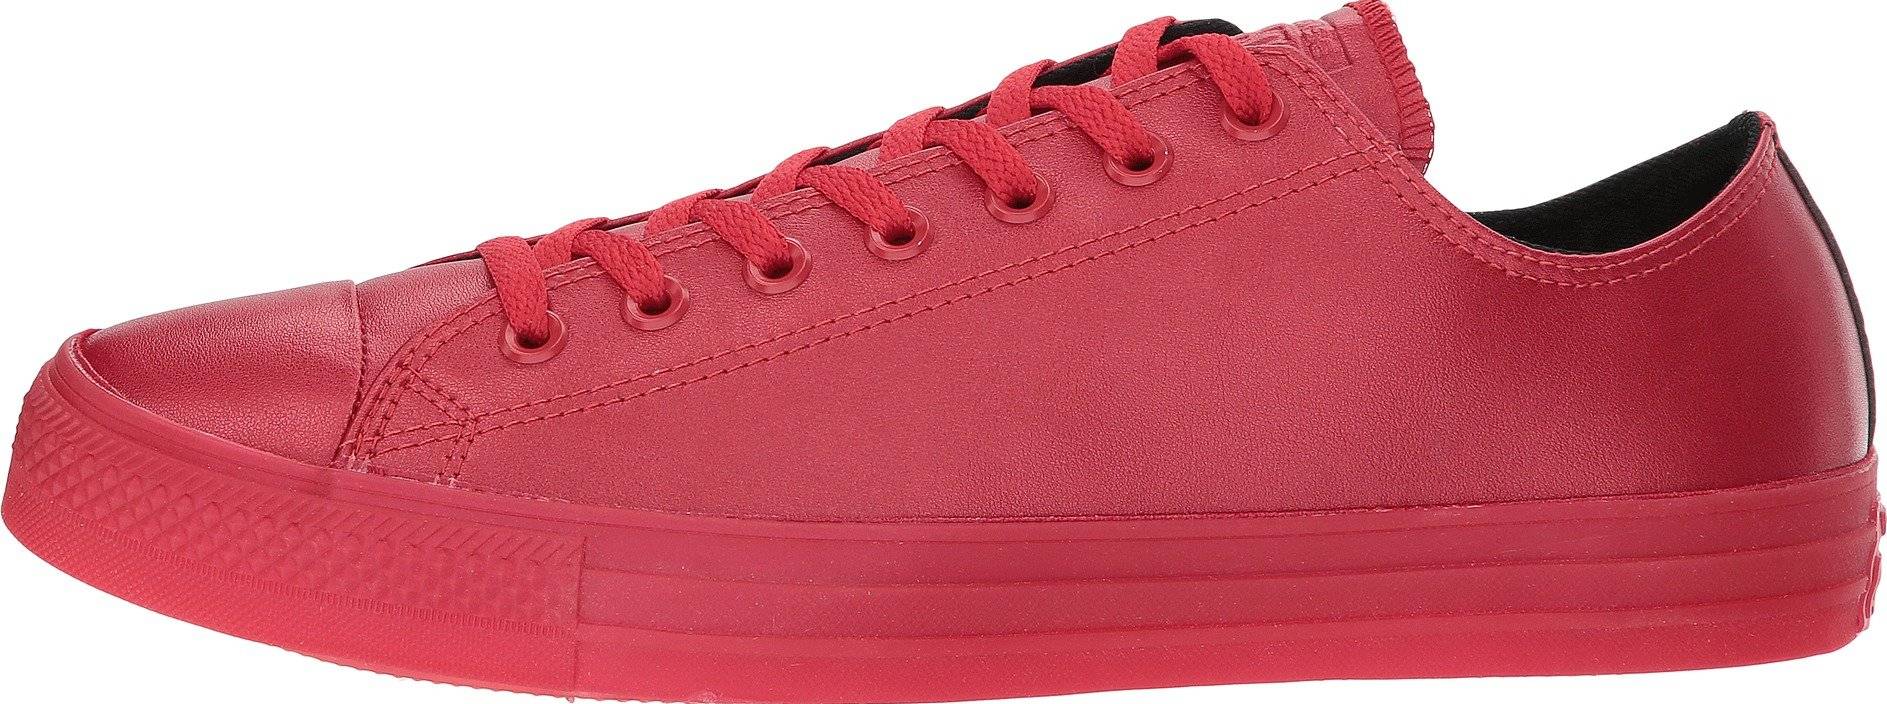 converse chuck taylor all star suede low top sneaker